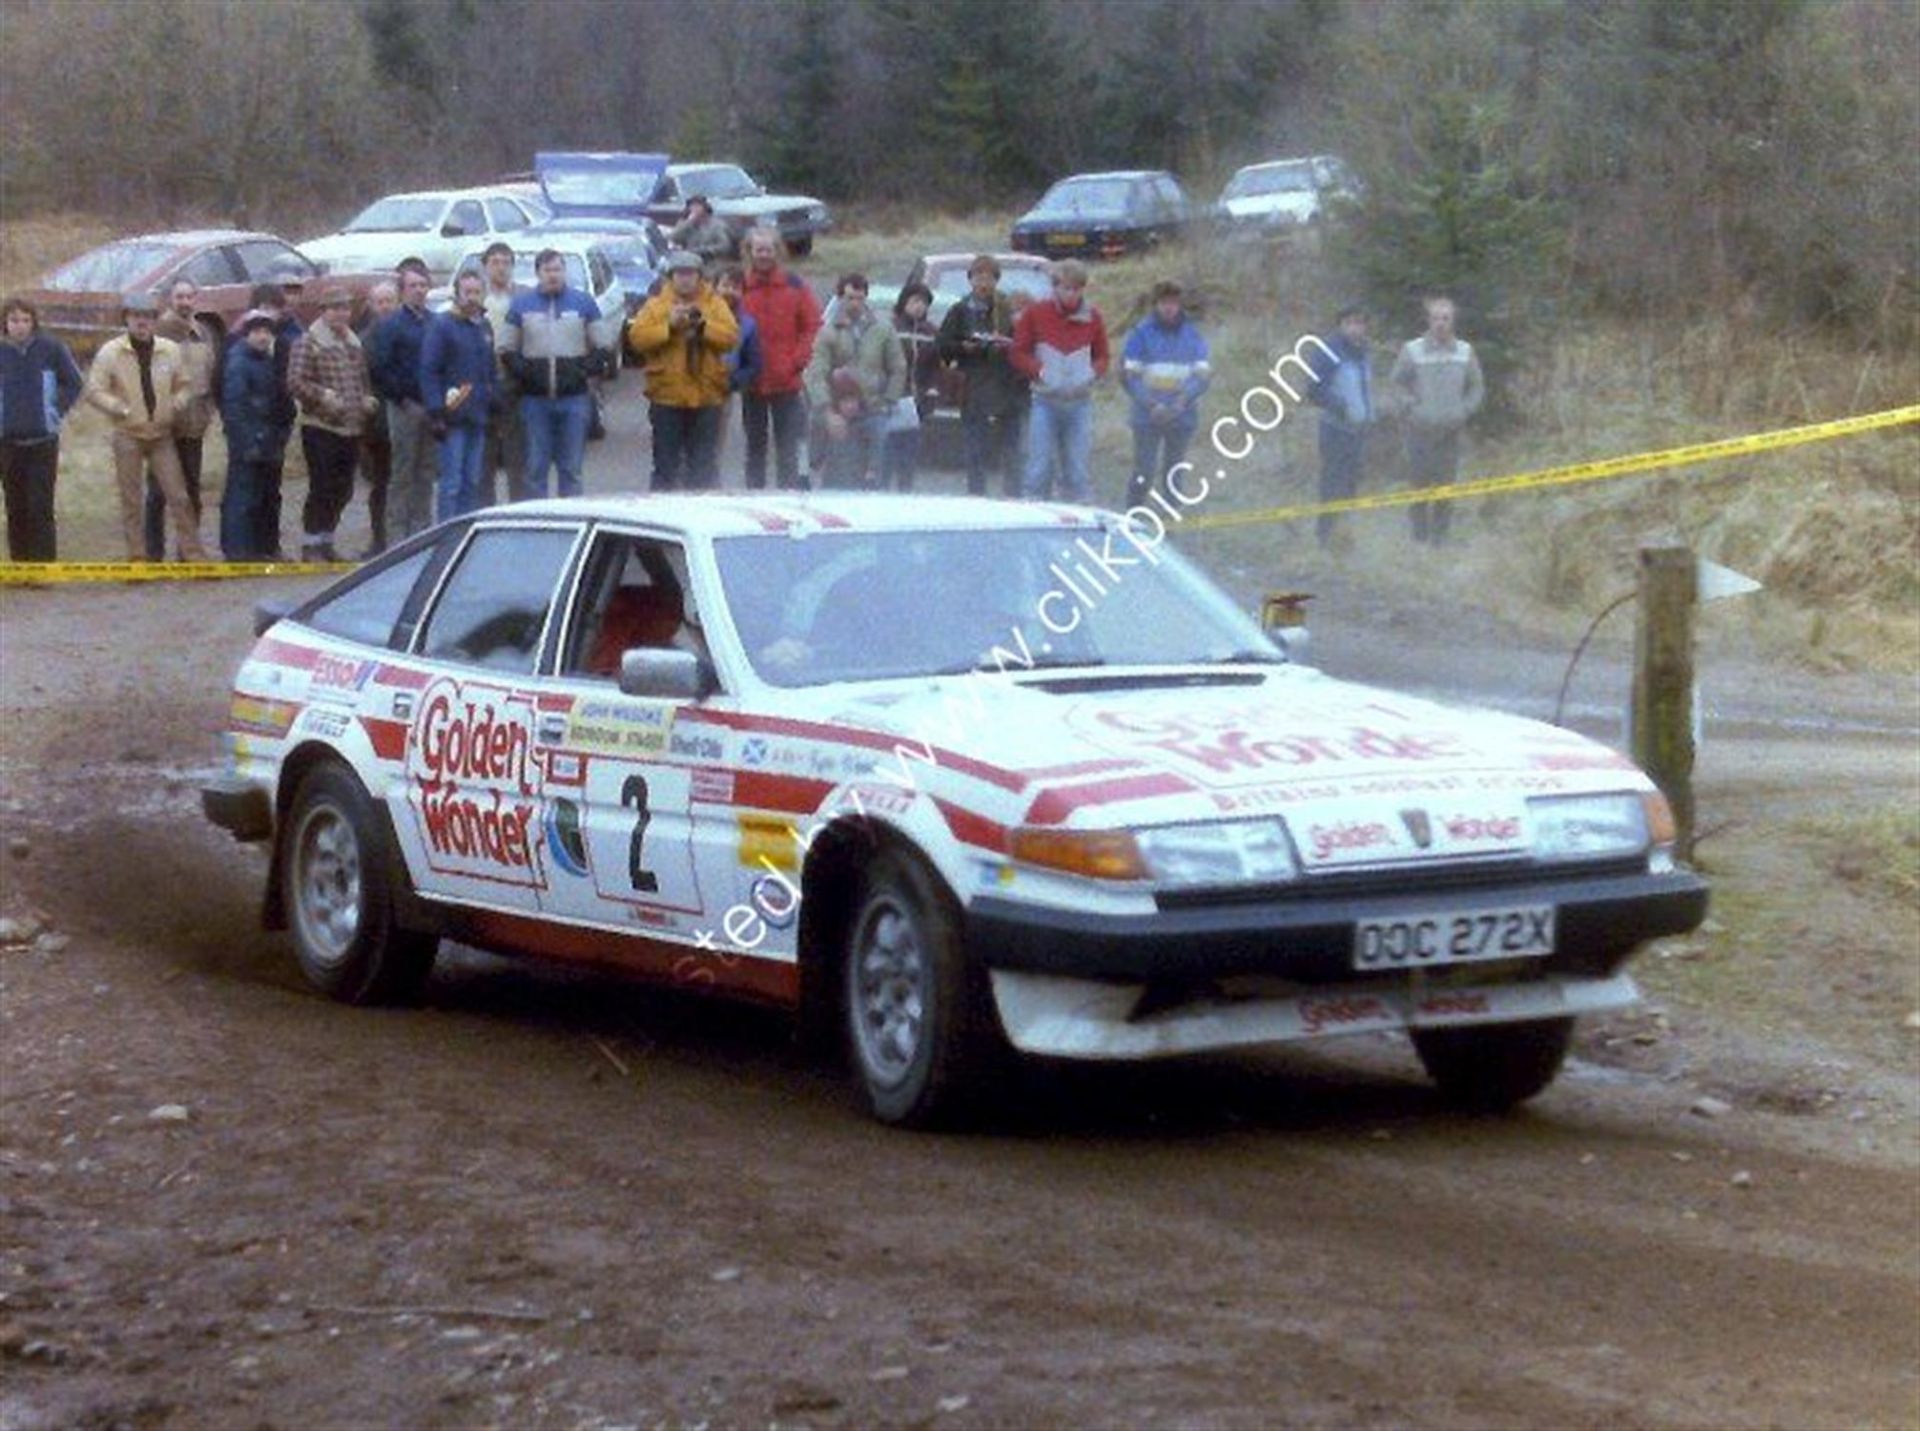 1982 Rover SD1 Vitesse 'Group A' Works Rally Car - Image 10 of 10